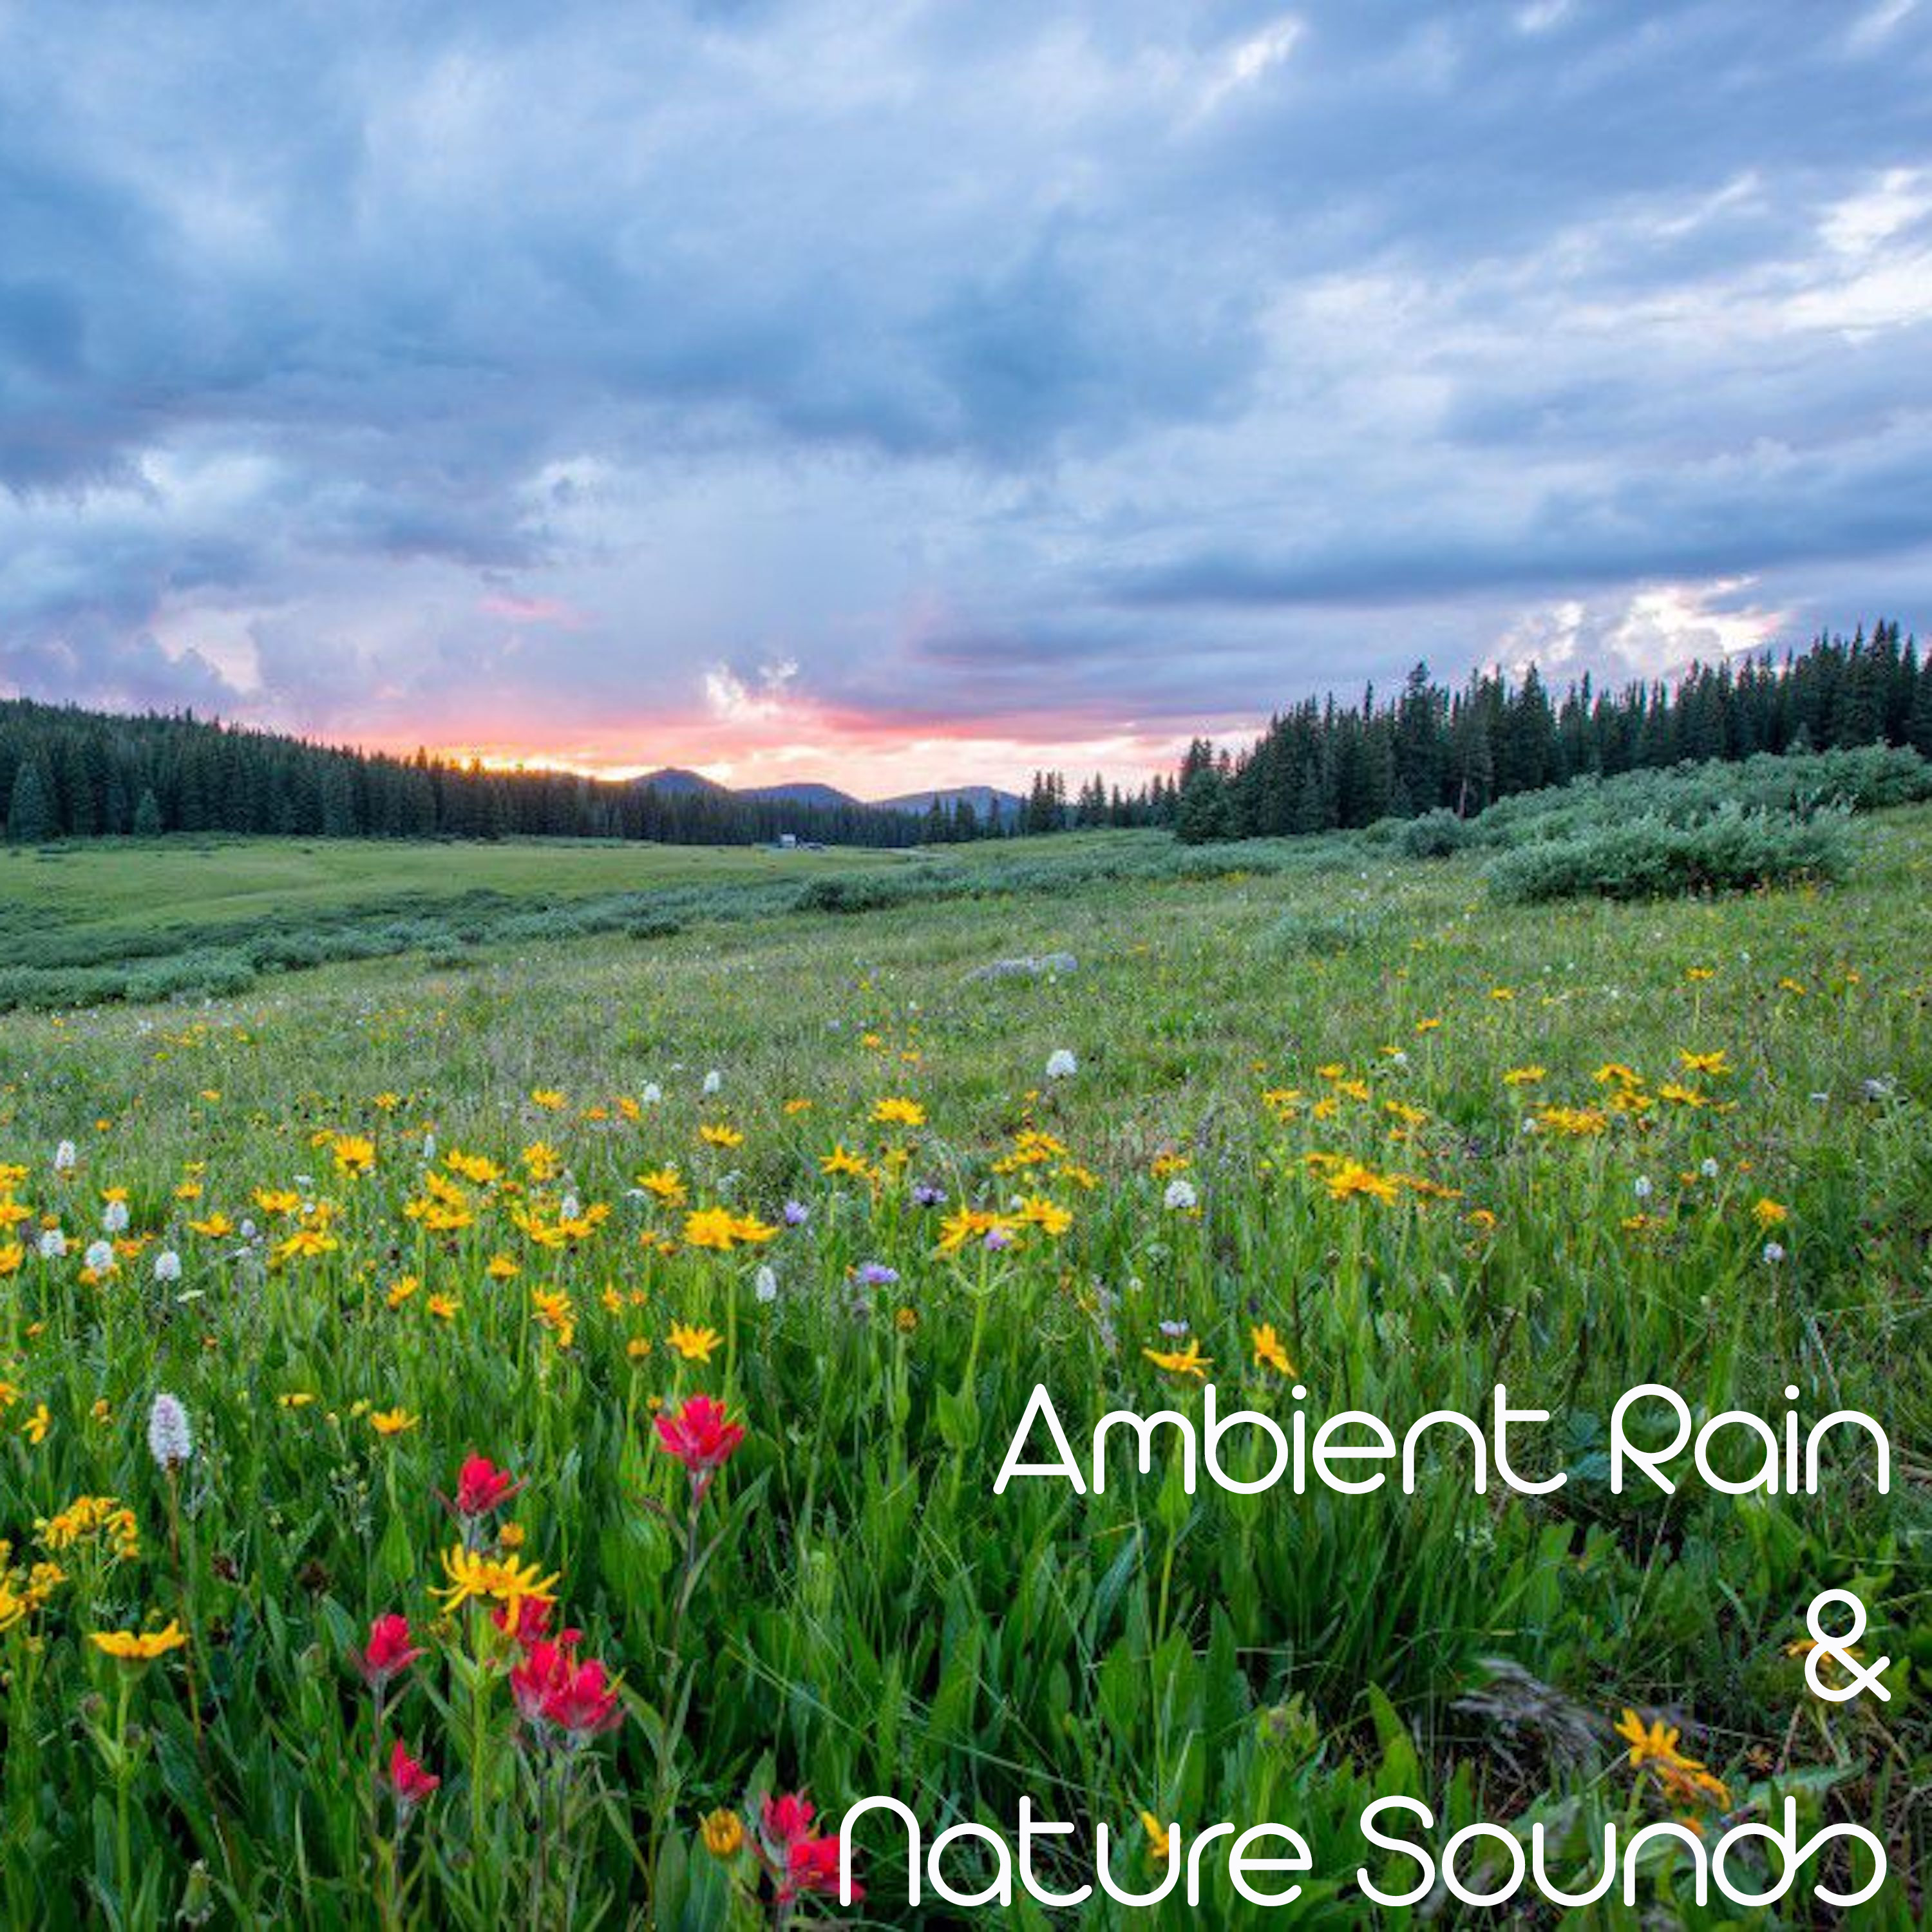 16 Ambient Rain Sounds and Nature Noises - Best of 2017 Compilation